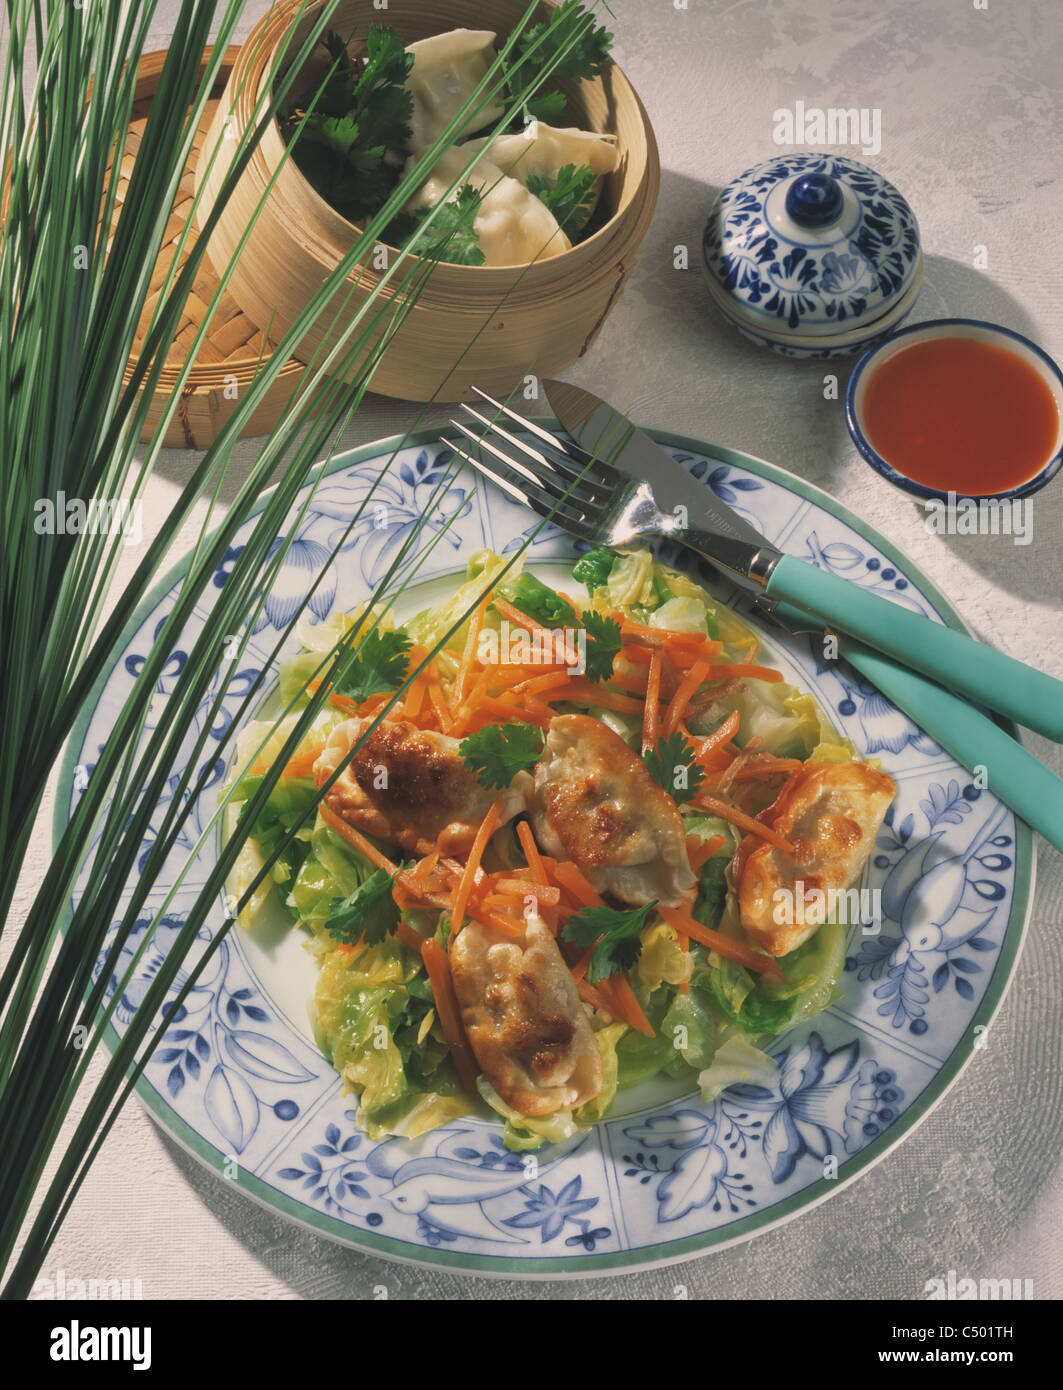 Pointed cabbage with Dim Sum Stock Photo